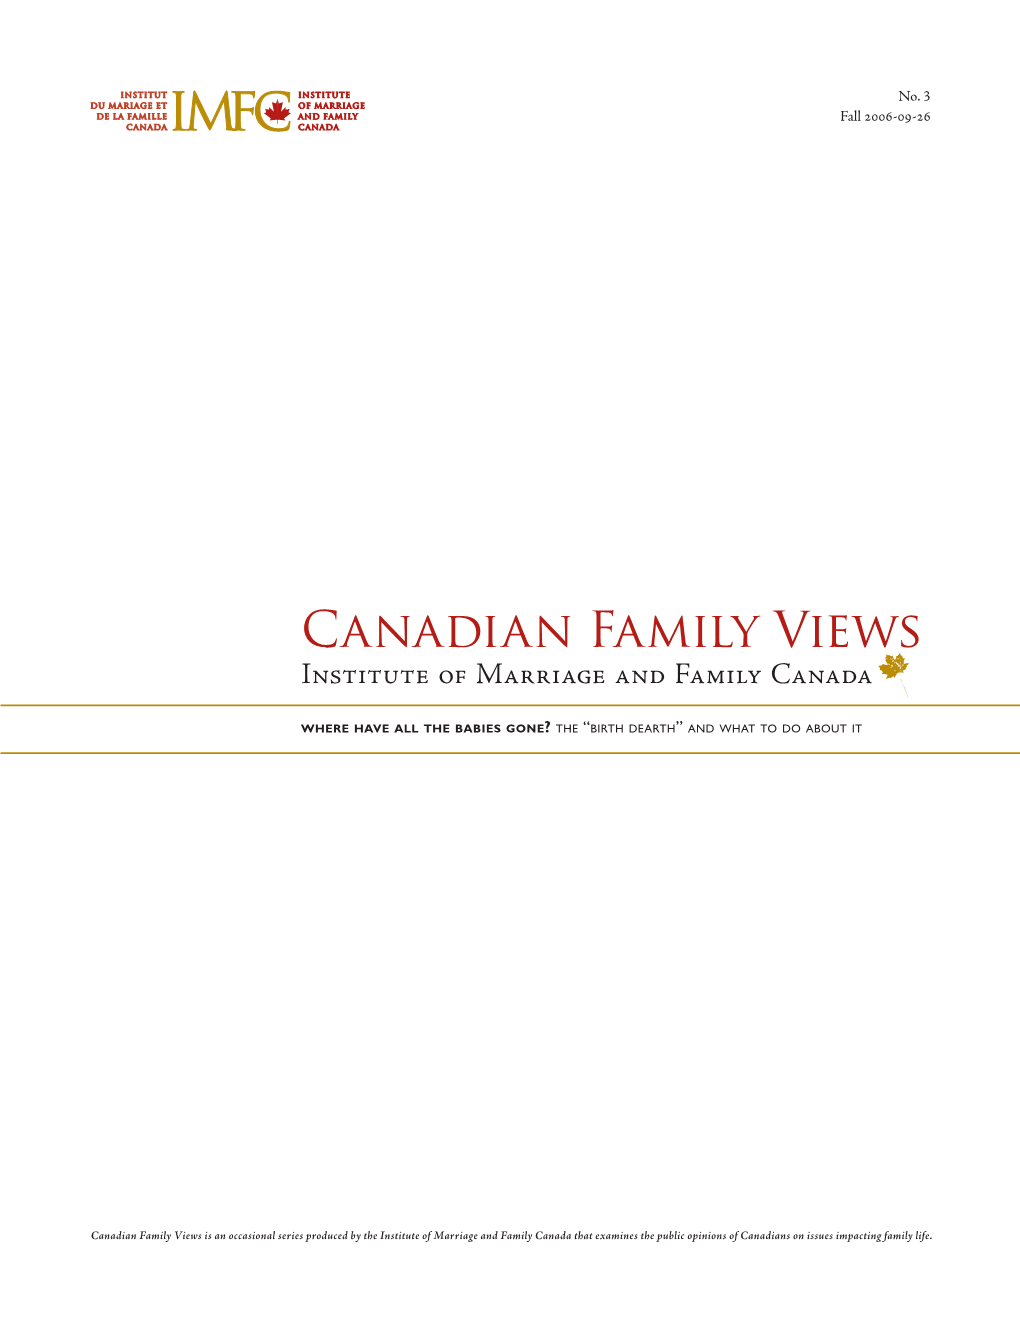 Canadian Family Views Institute of Marriage and Family Canada